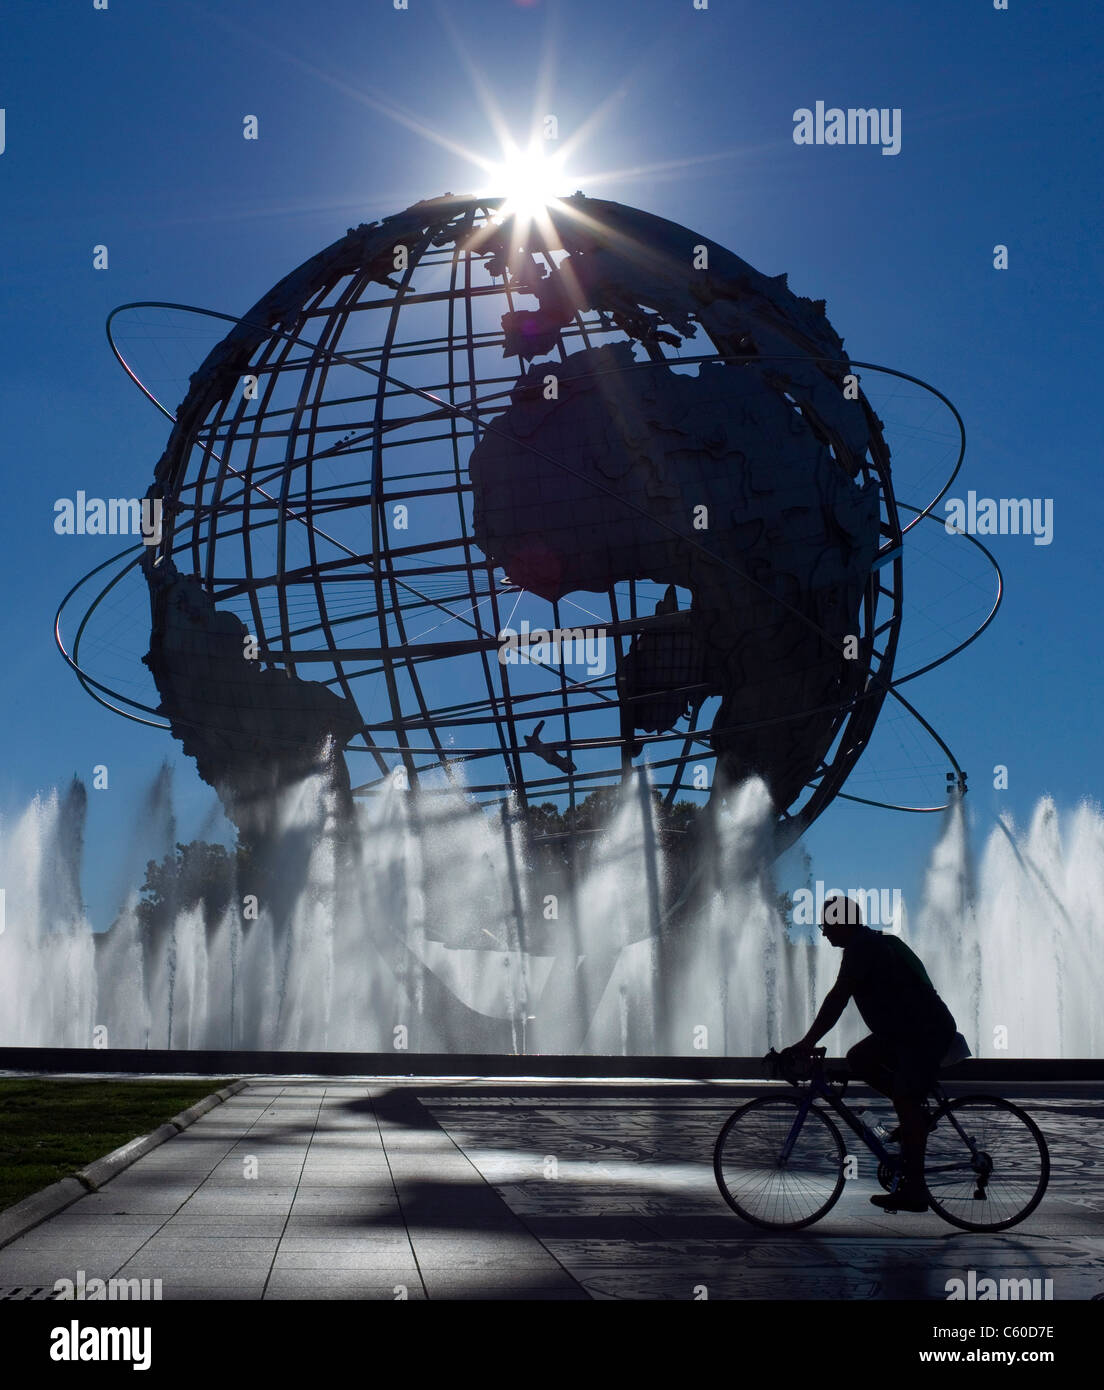 A man cycles near the Unisphere in Flushing Meadows Corona Park in the borough of Queens Tuesday, Sept. 14, 2010, in New York. Stock Photo